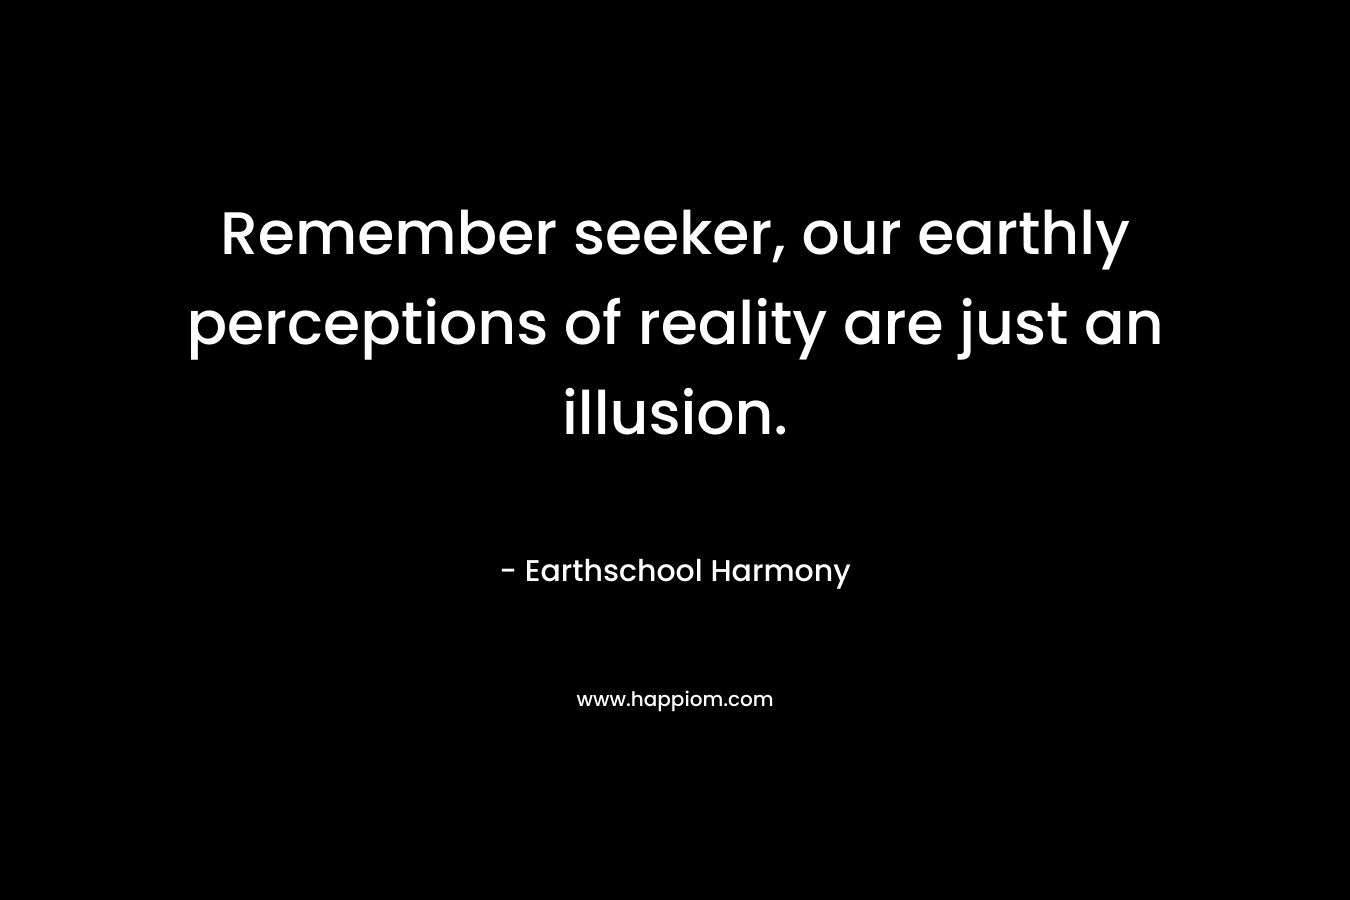 Remember seeker, our earthly perceptions of reality are just an illusion. – Earthschool Harmony